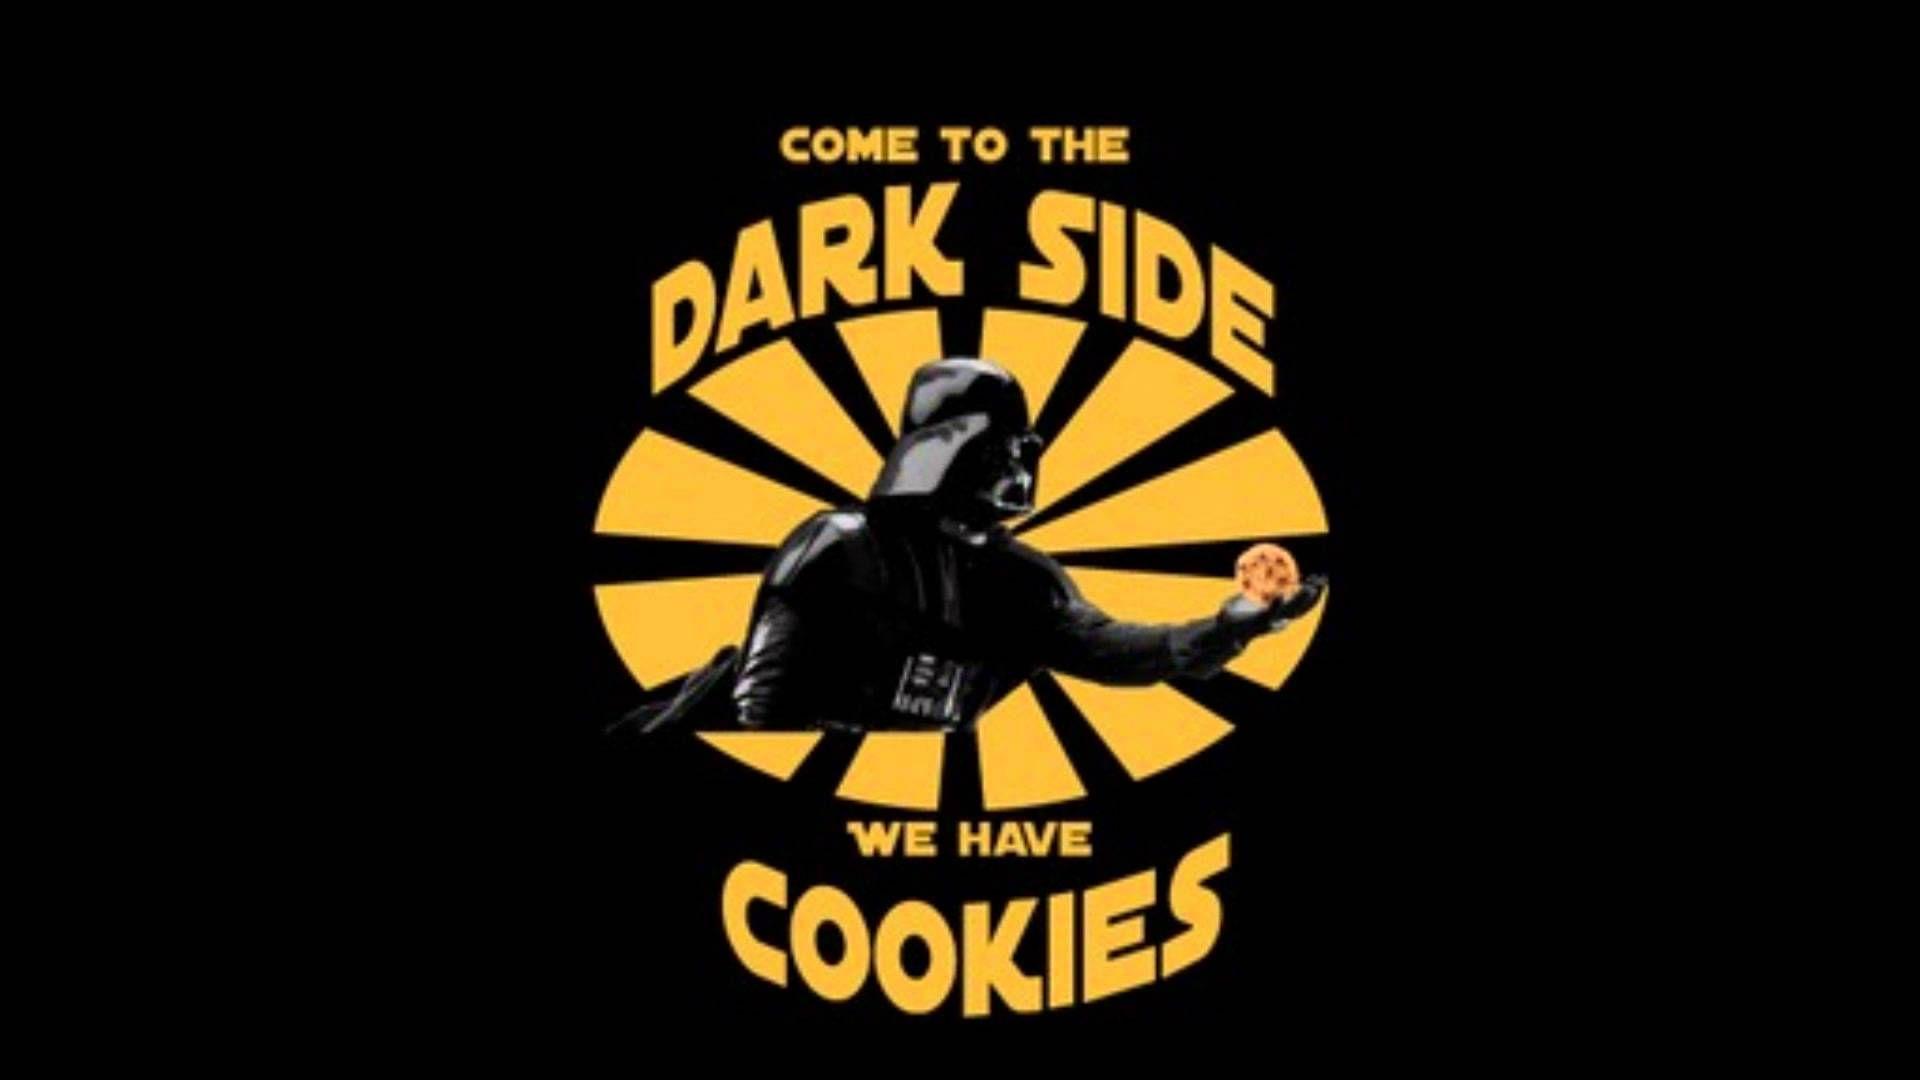 Join The Dark Side, They Have an Awesome Darth Vader